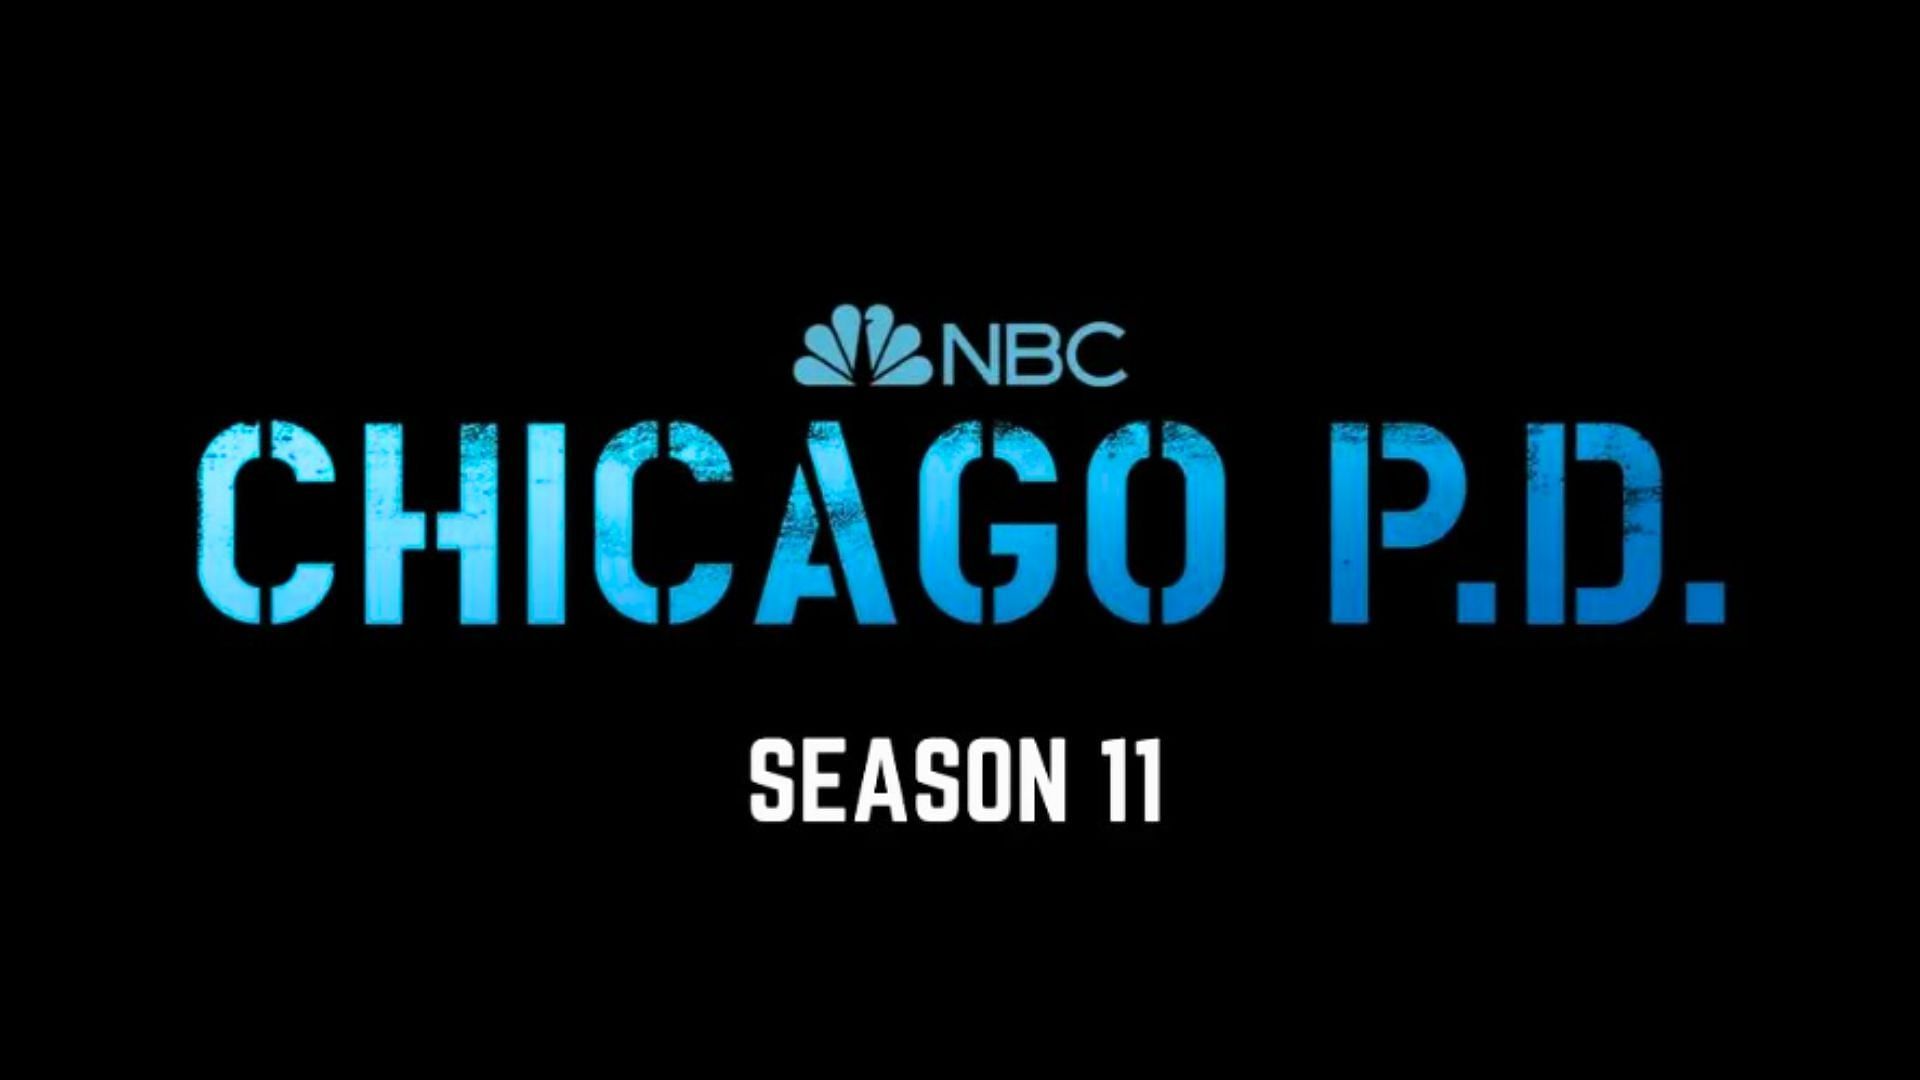 Chicago P.D. is currently airing its eleventh season (Image via X)